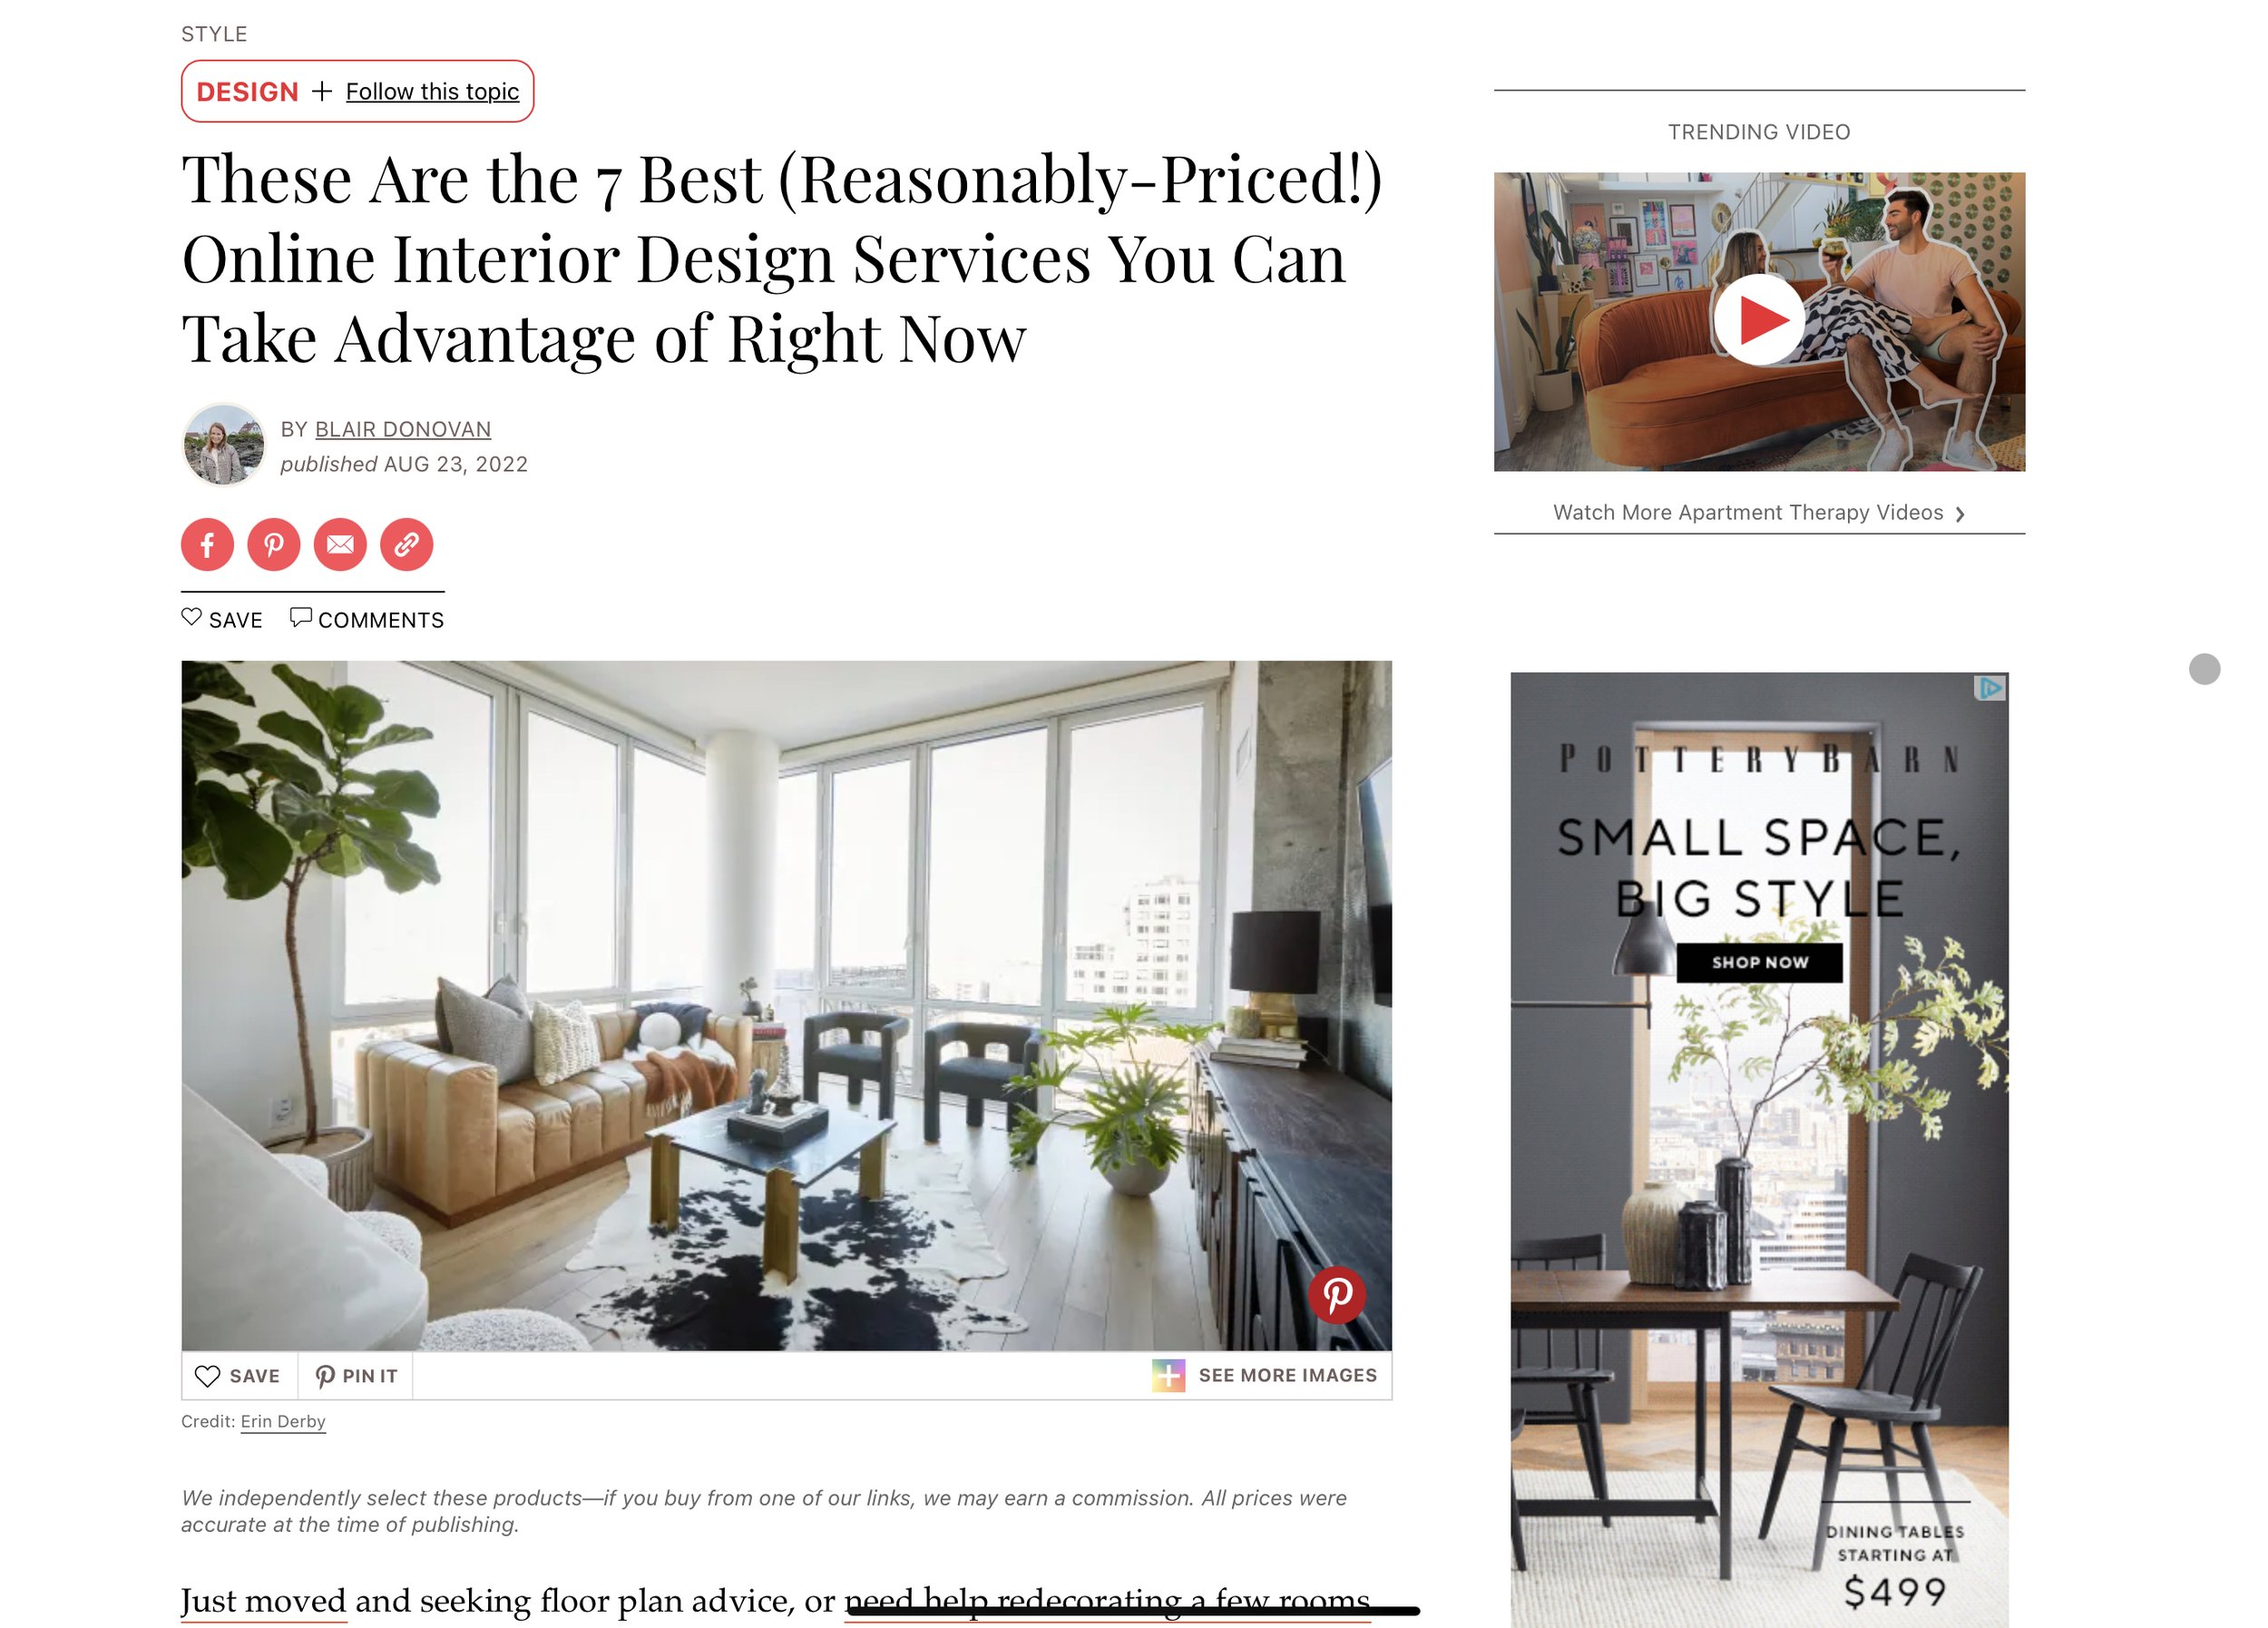 roomLift featured as one of the best online interior design services in Apartment Therapy